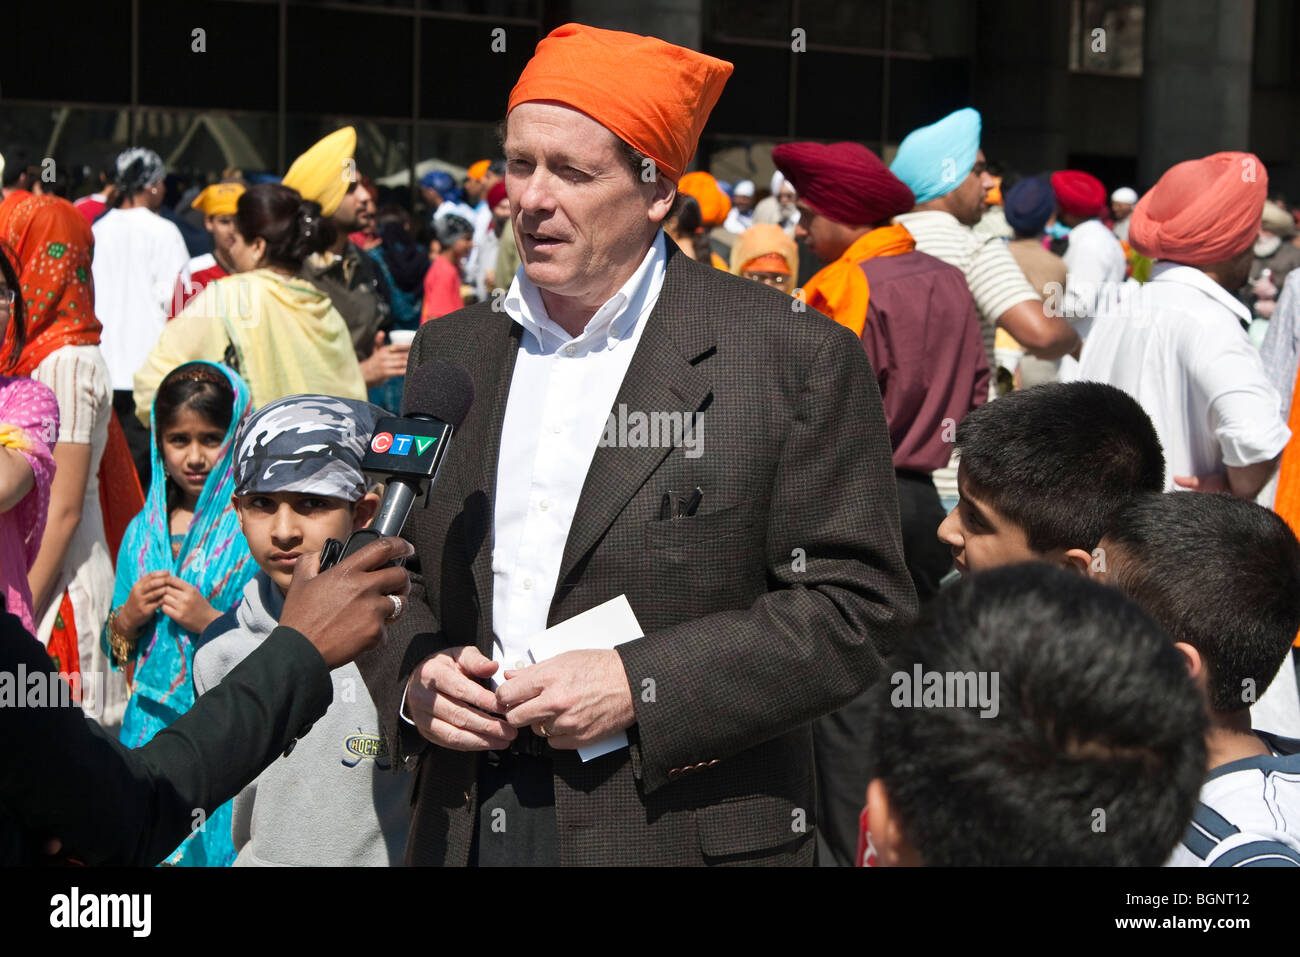 John Tory giving interview at the annual spring Vaisakhi parade in Toronto, celebrating the Sikh culture Stock Photo